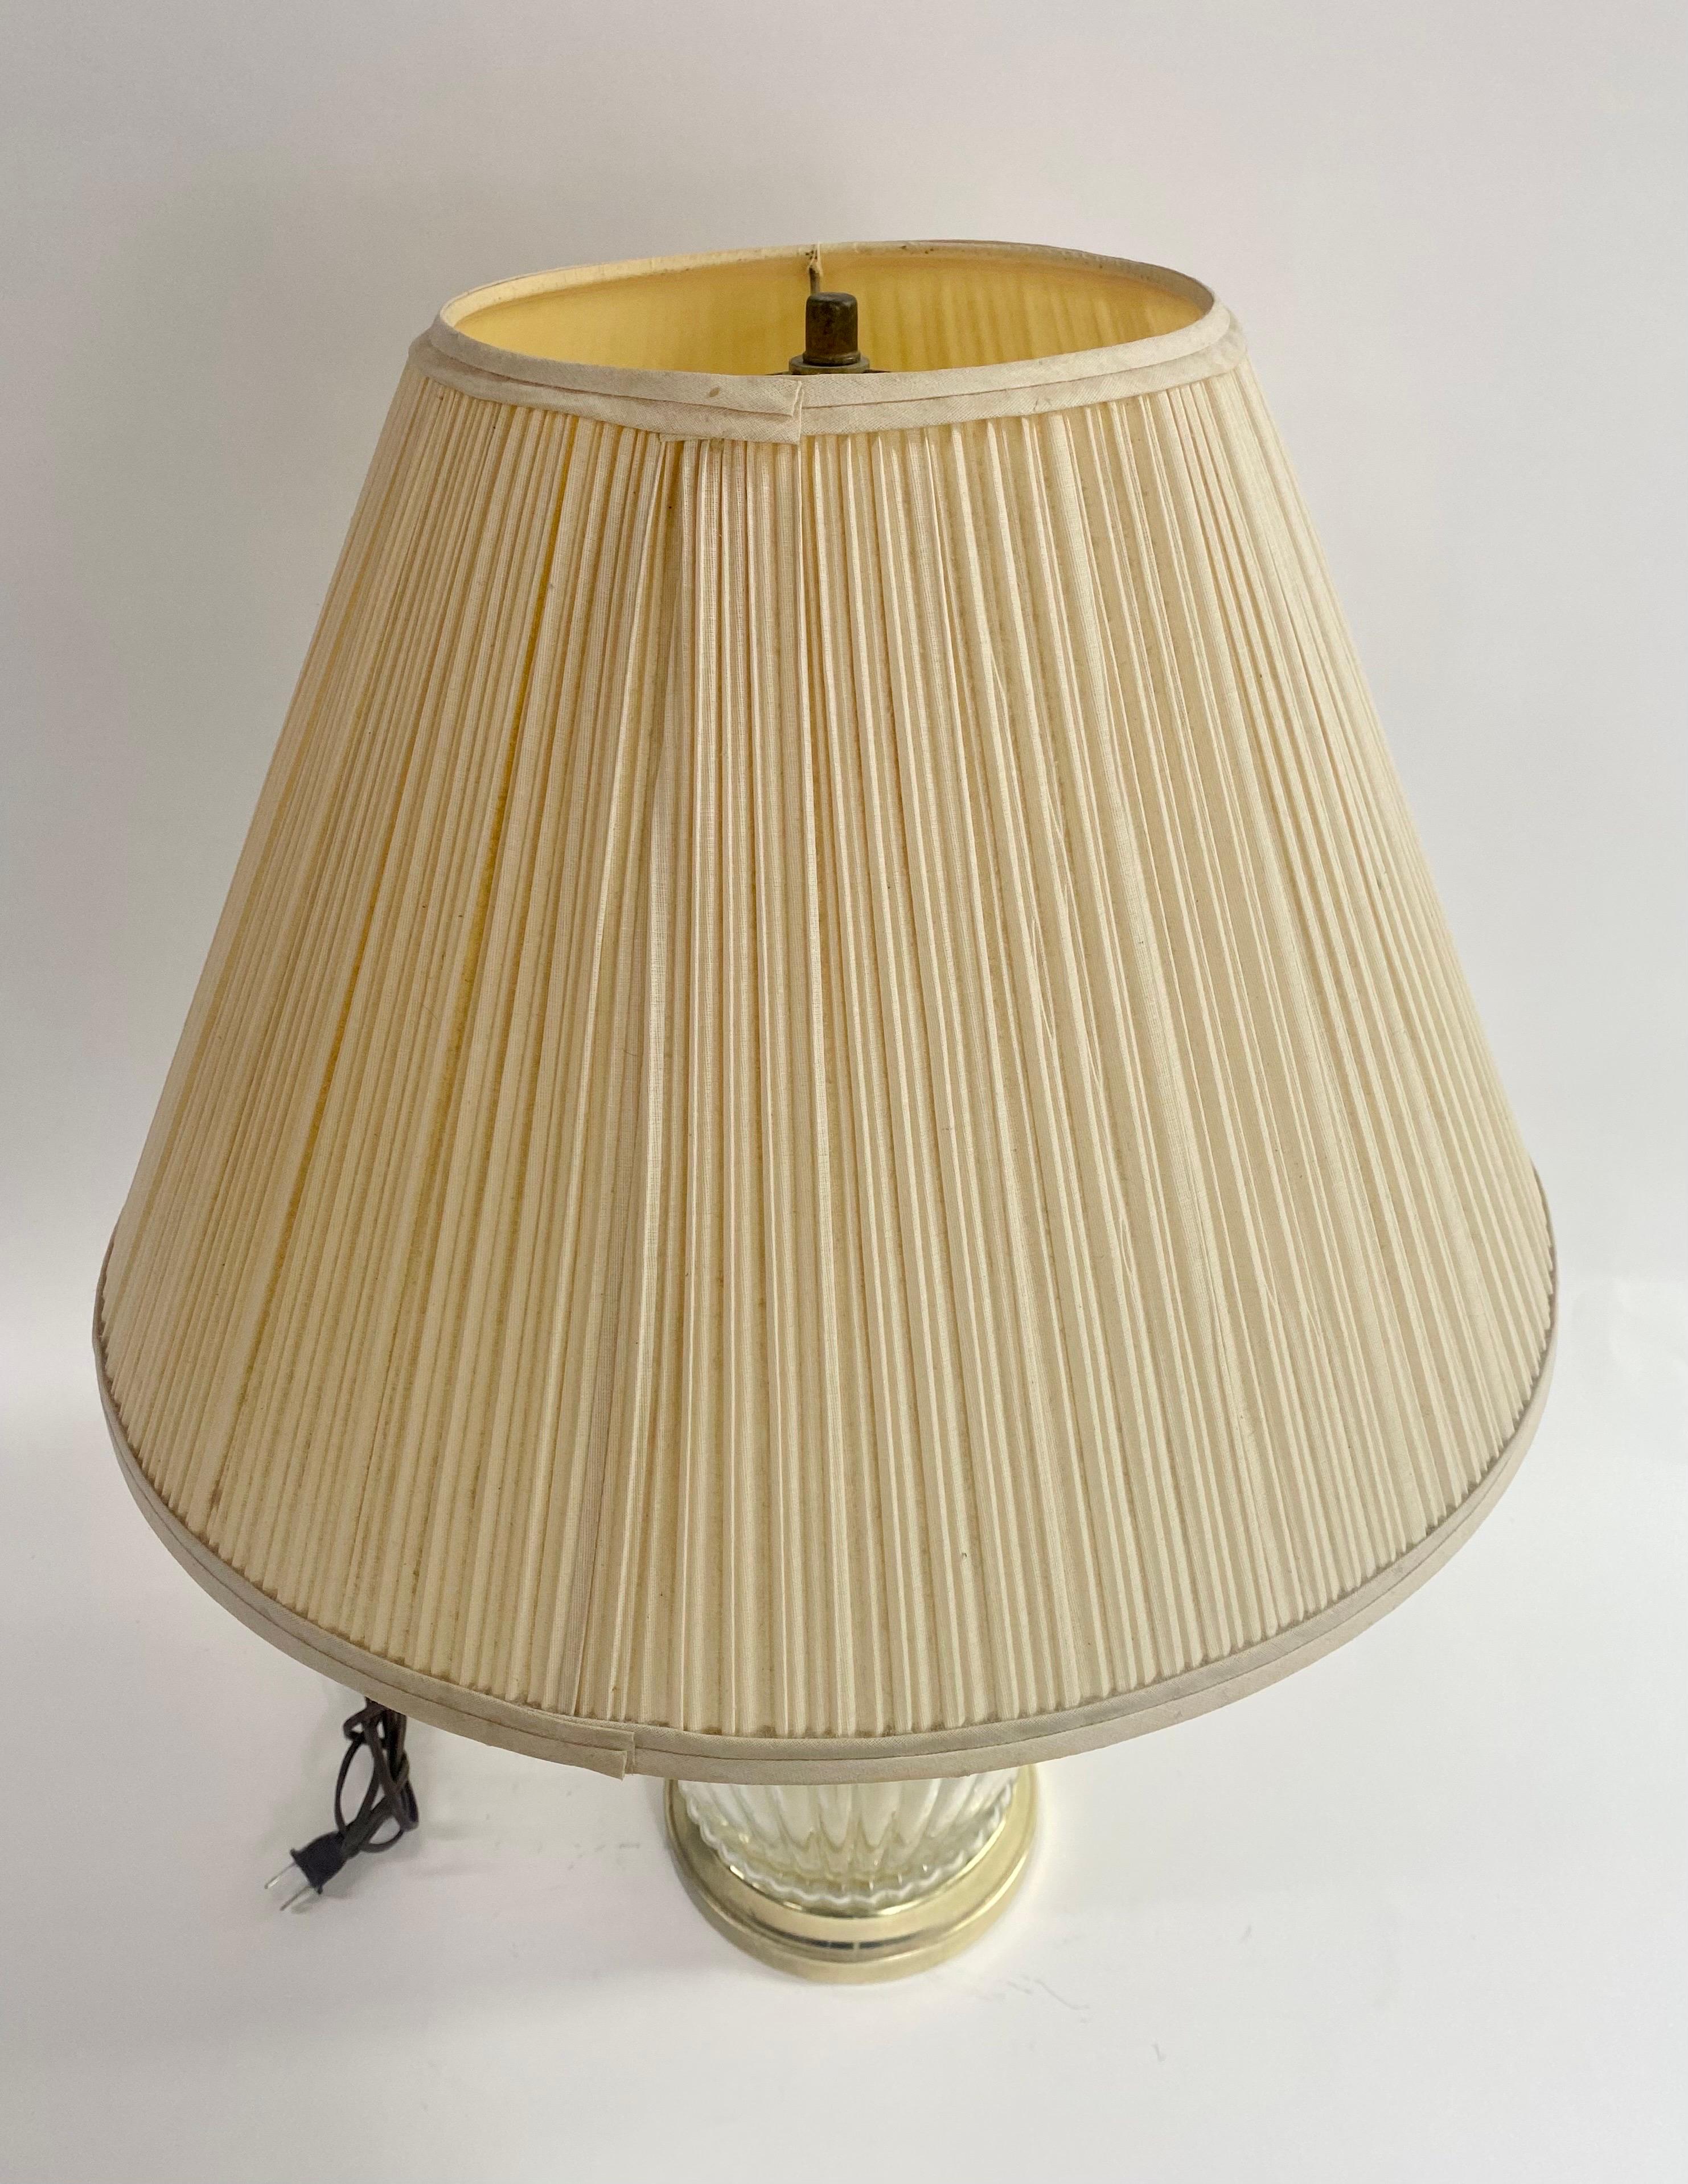 20th Century Midcentury Hollywood Regency Style Glass Table Lamp For Sale